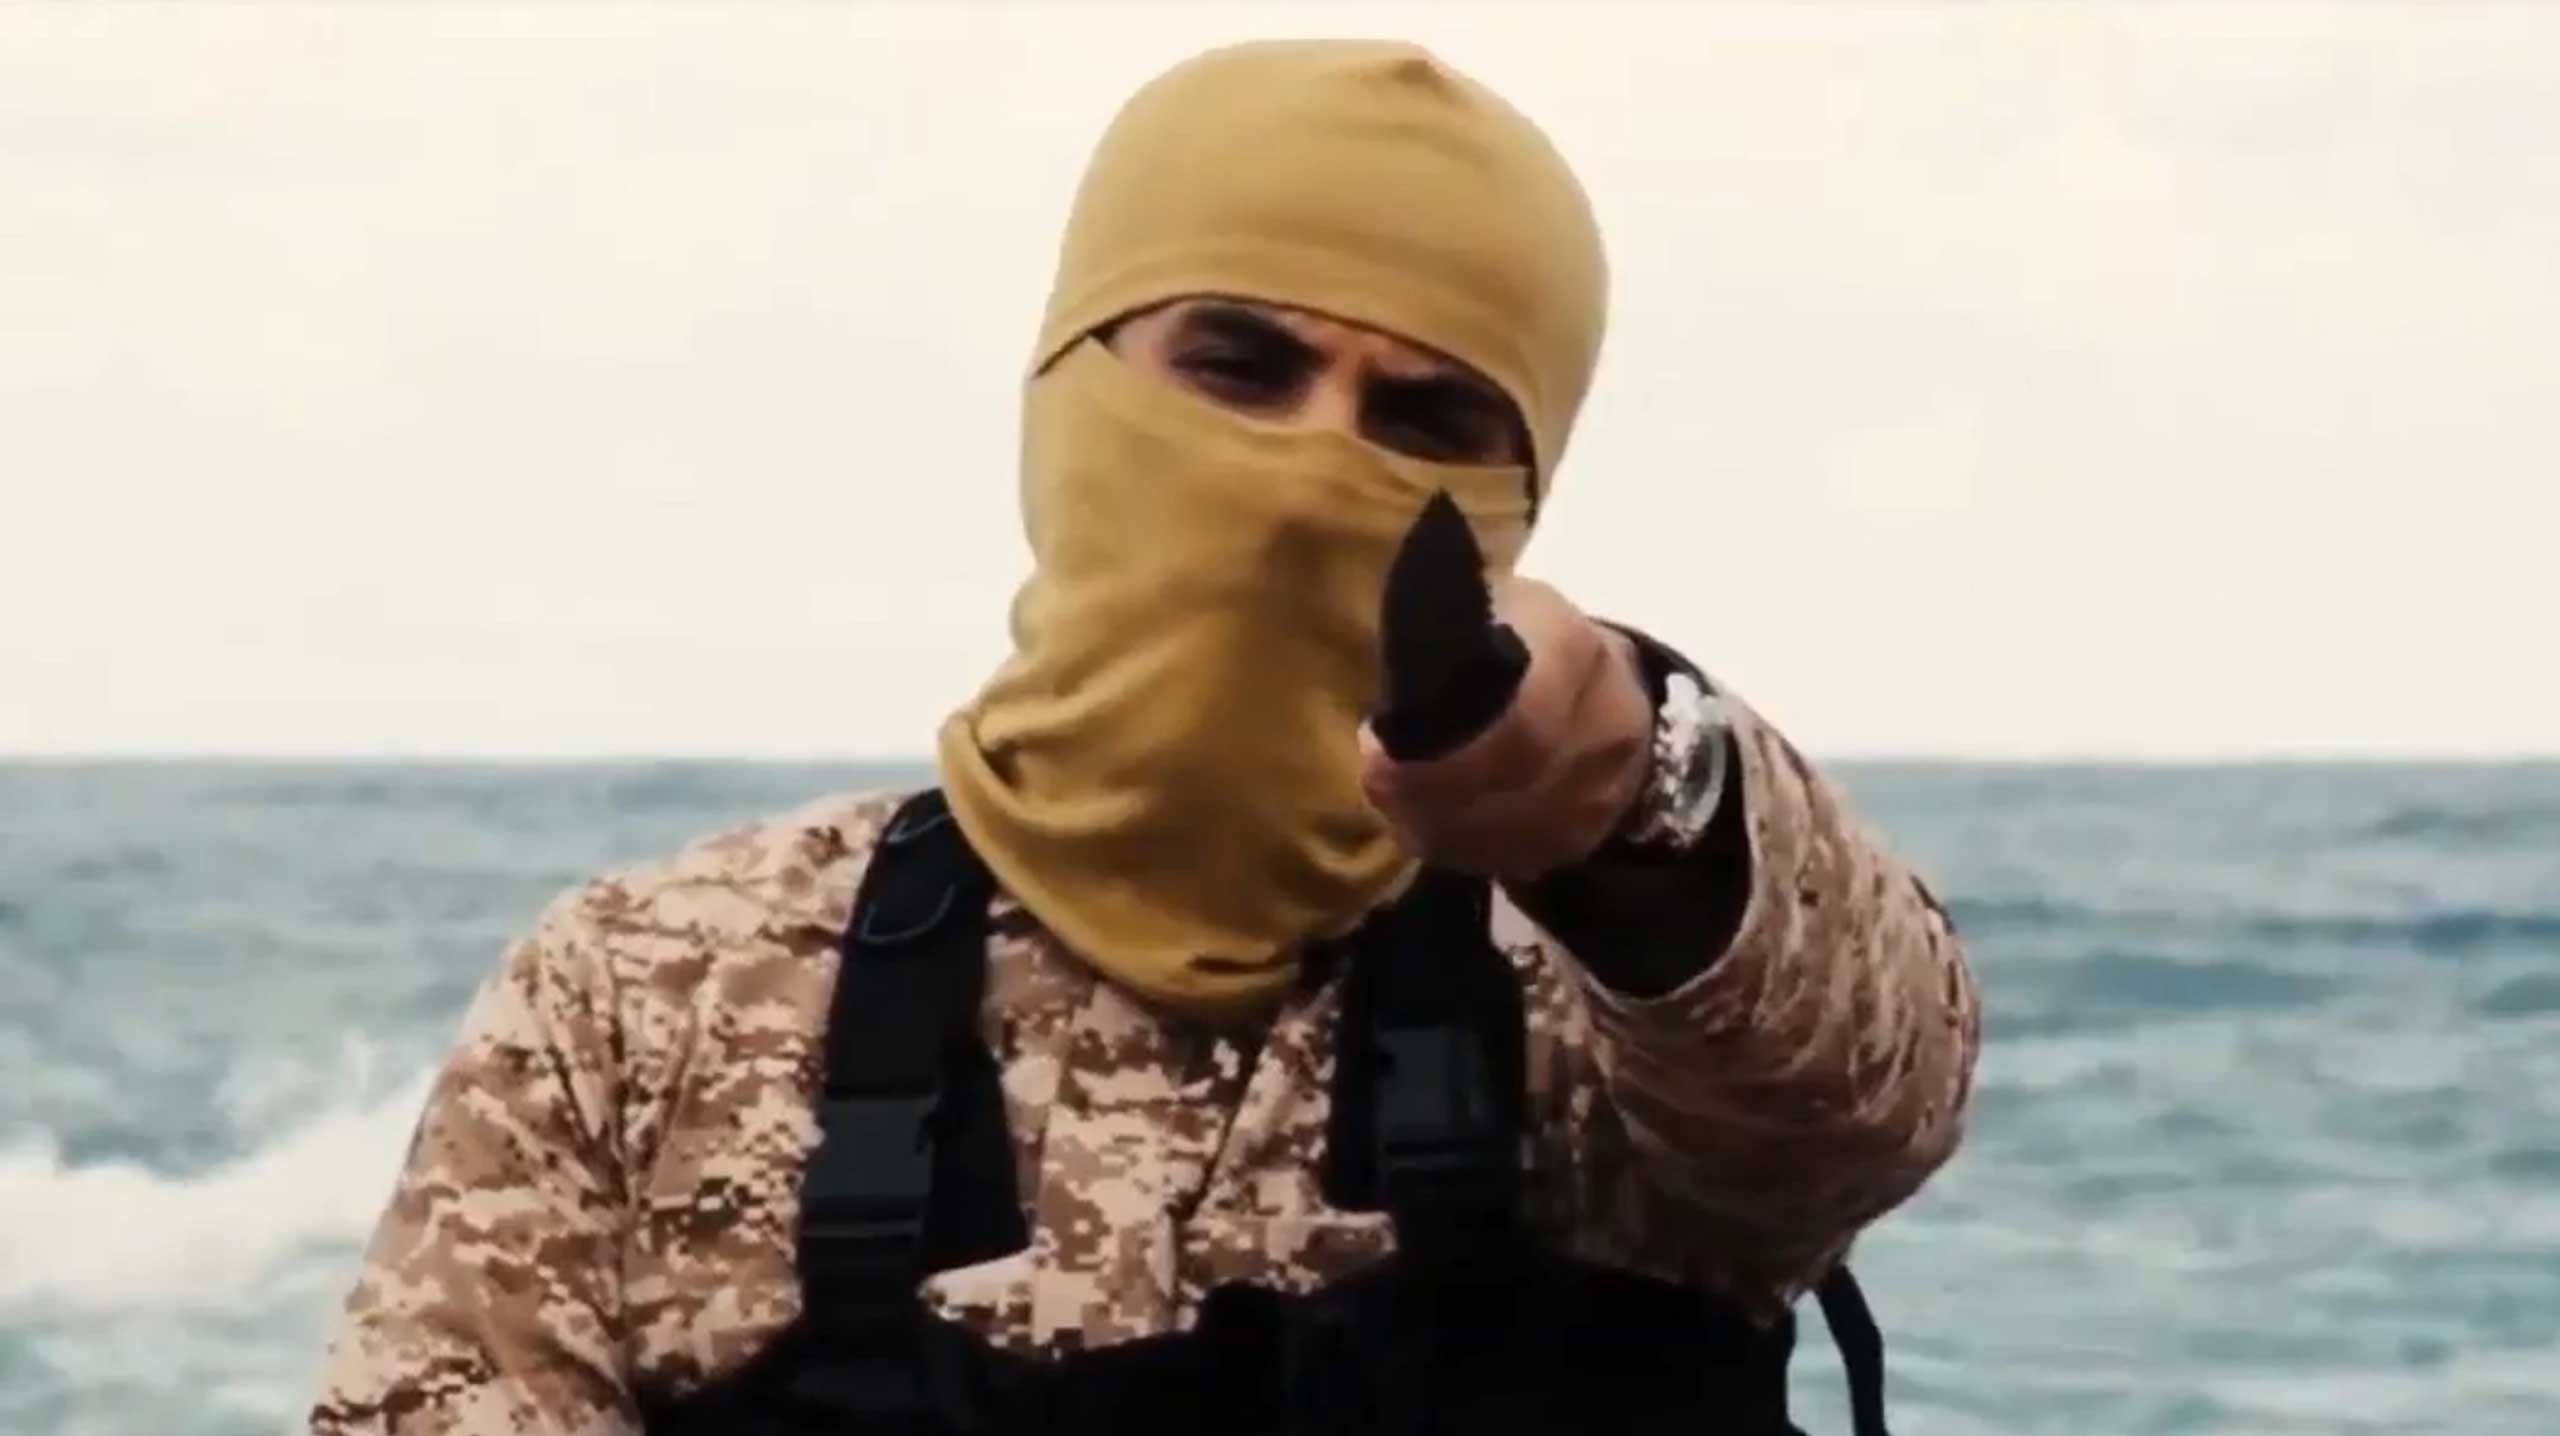 Screengrab from an ISIS video made in Libya and released on Feb. 15, 2015. (Polaris)